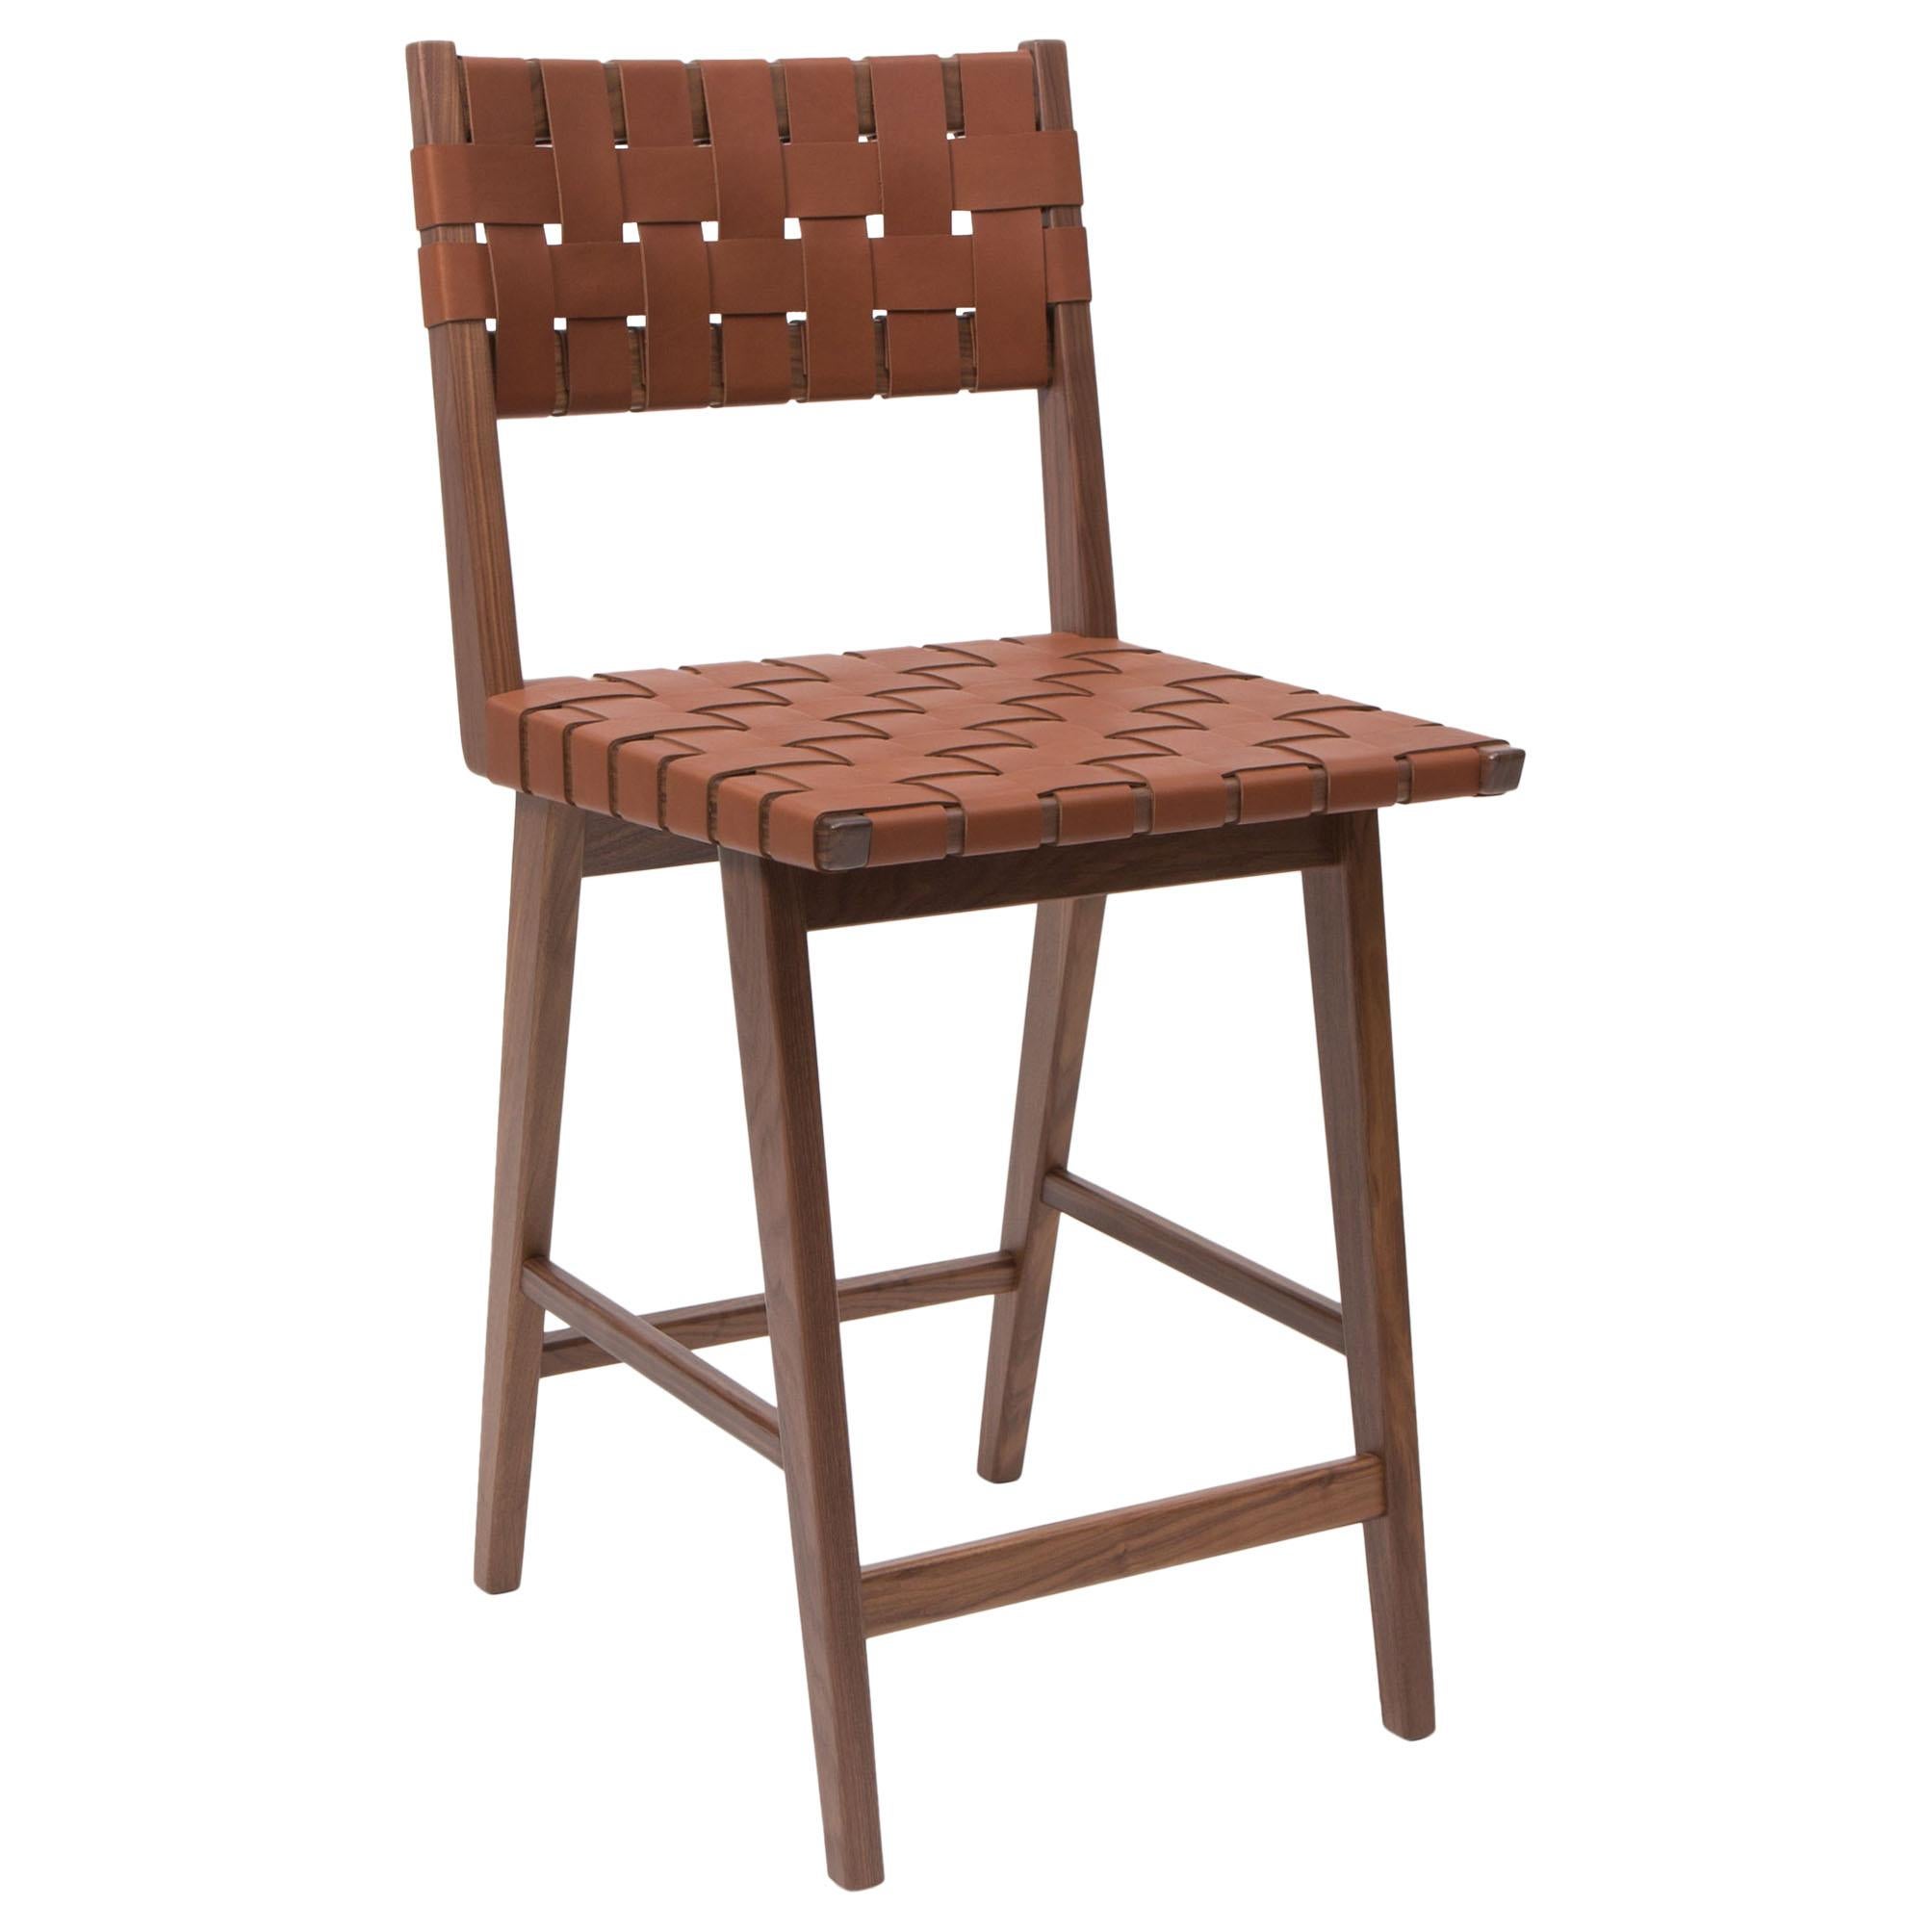 Woven Leather Backed Counter Stool in Walnut and Tan Leather by Mel Smilow